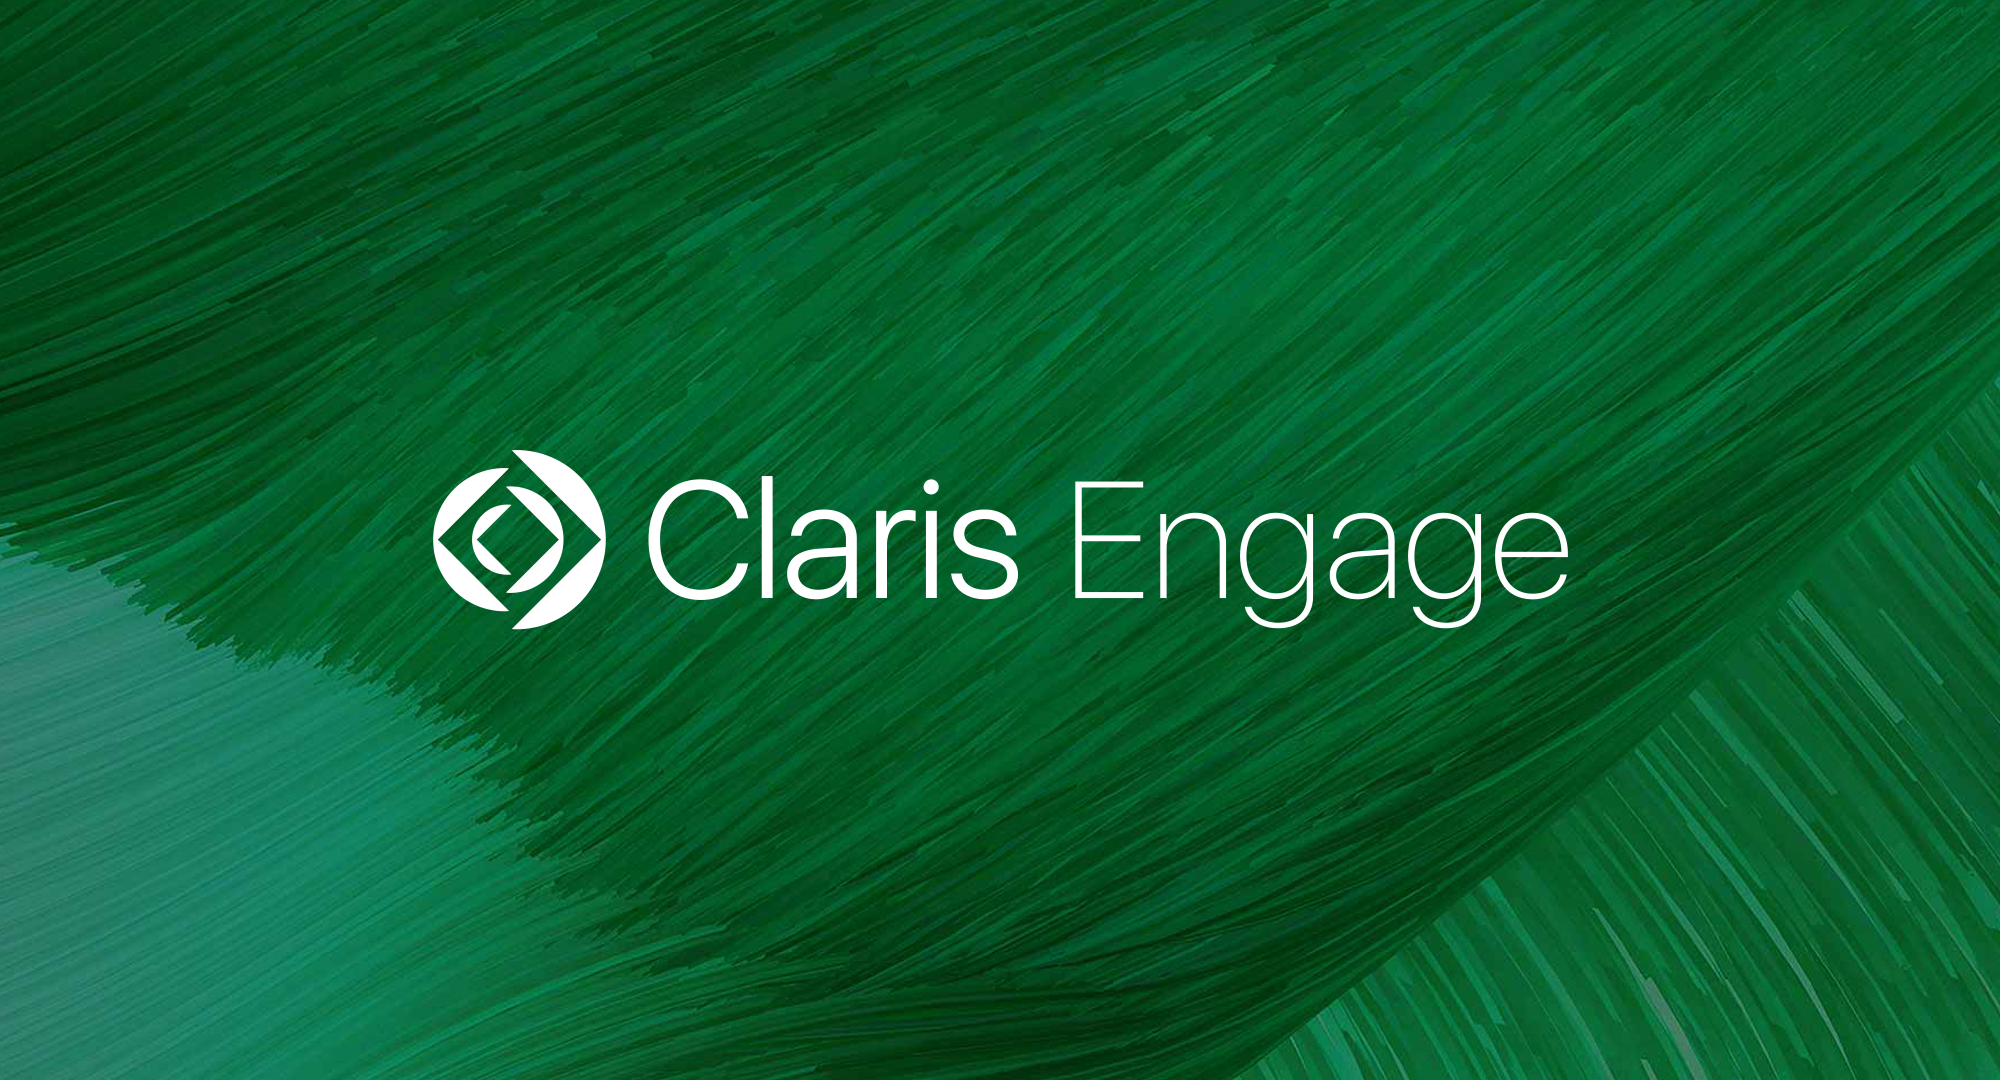 Join Proof at the Claris Engage 2020 Community Virtual Conference